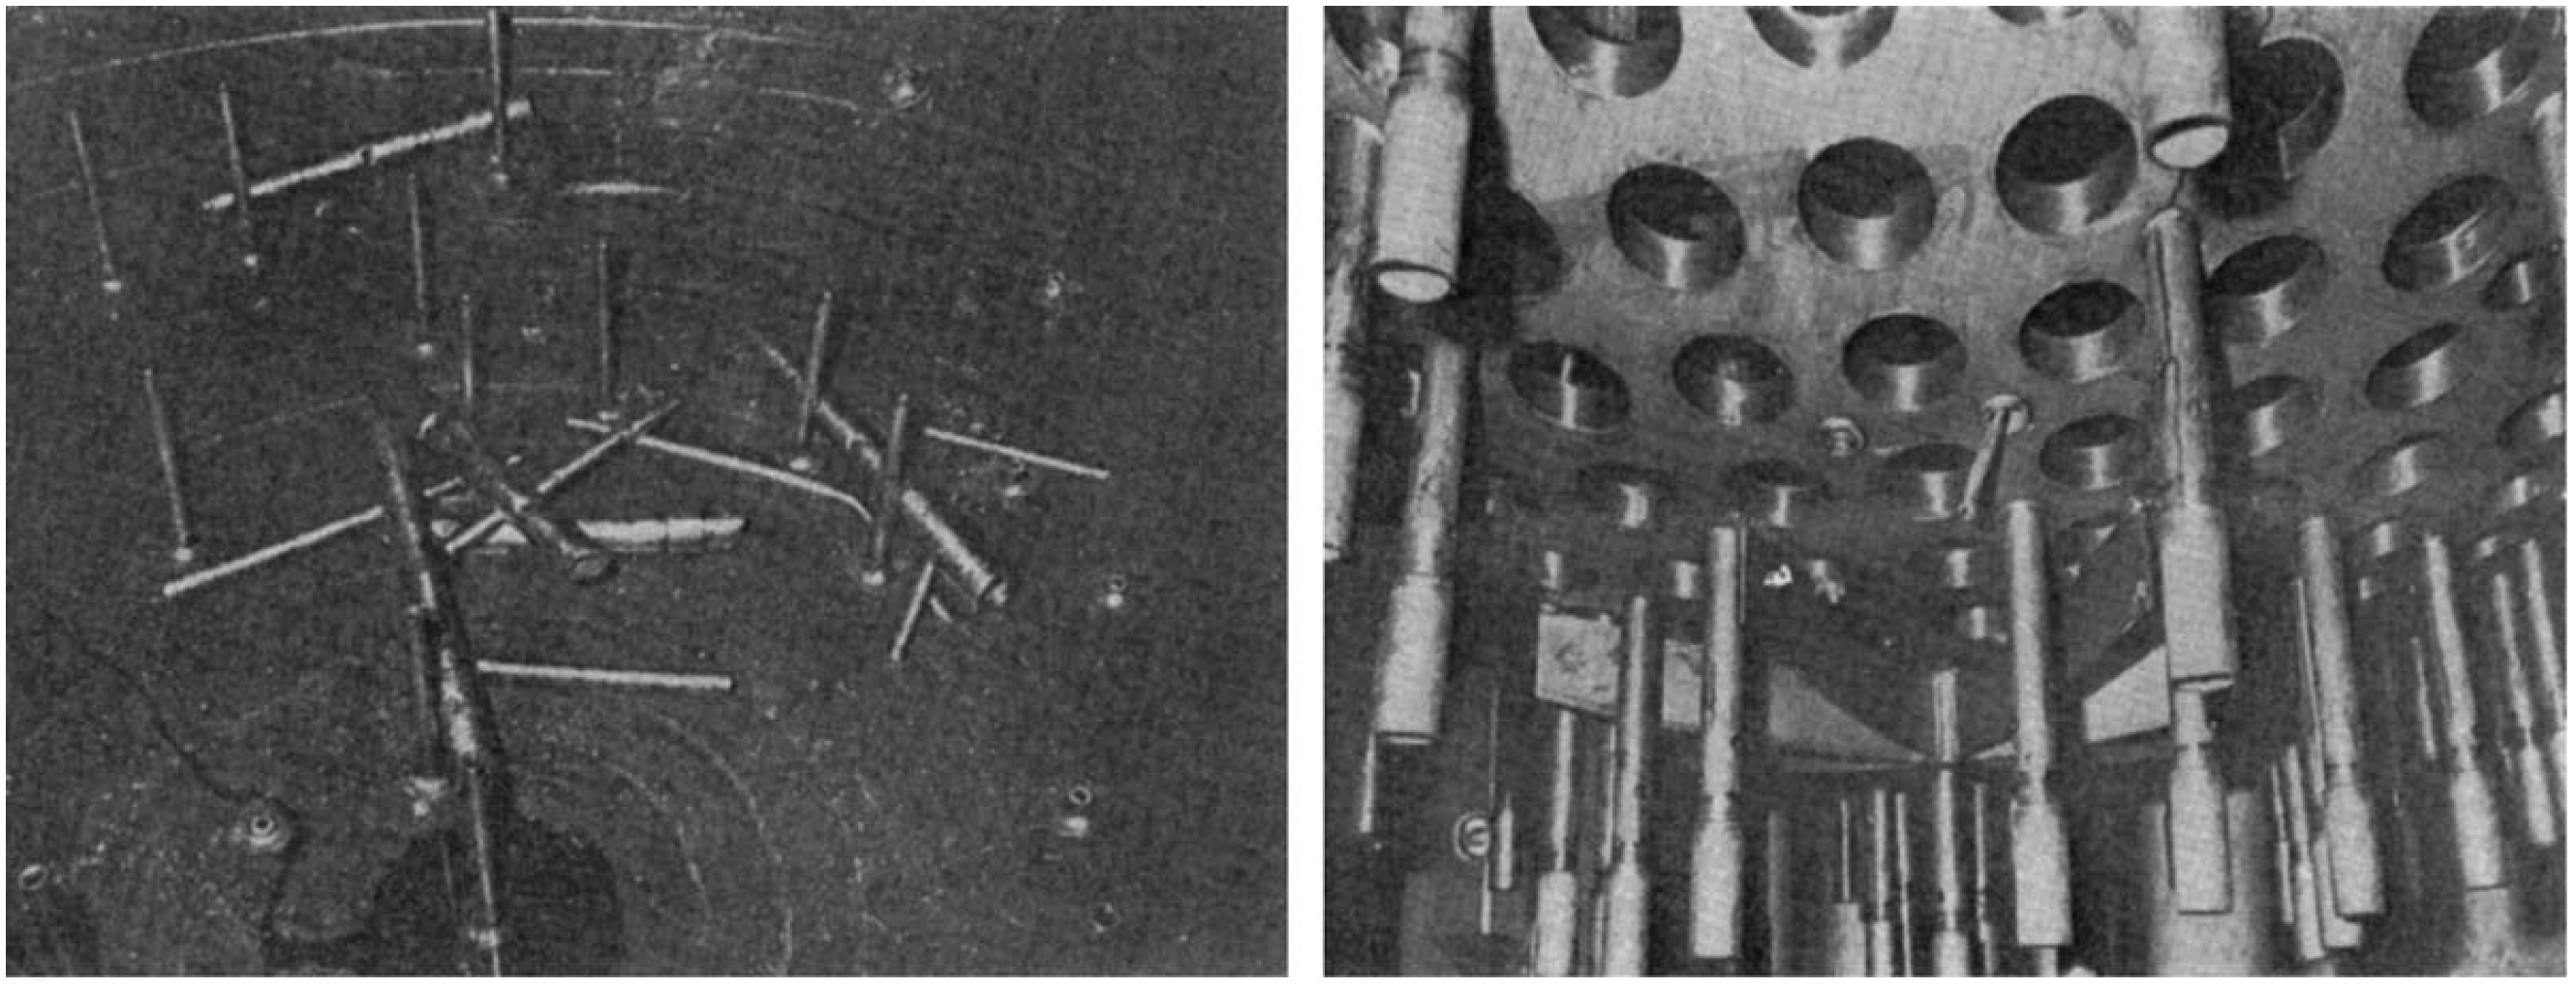 Figure 1: The left picture shows the broken in-core instrumental (ICI) nozzles from the heat exchanger. The picture in the right shows the missing ICI tubes from the bottom of the pressure vessel [PaÃ¯doussis, 2006].